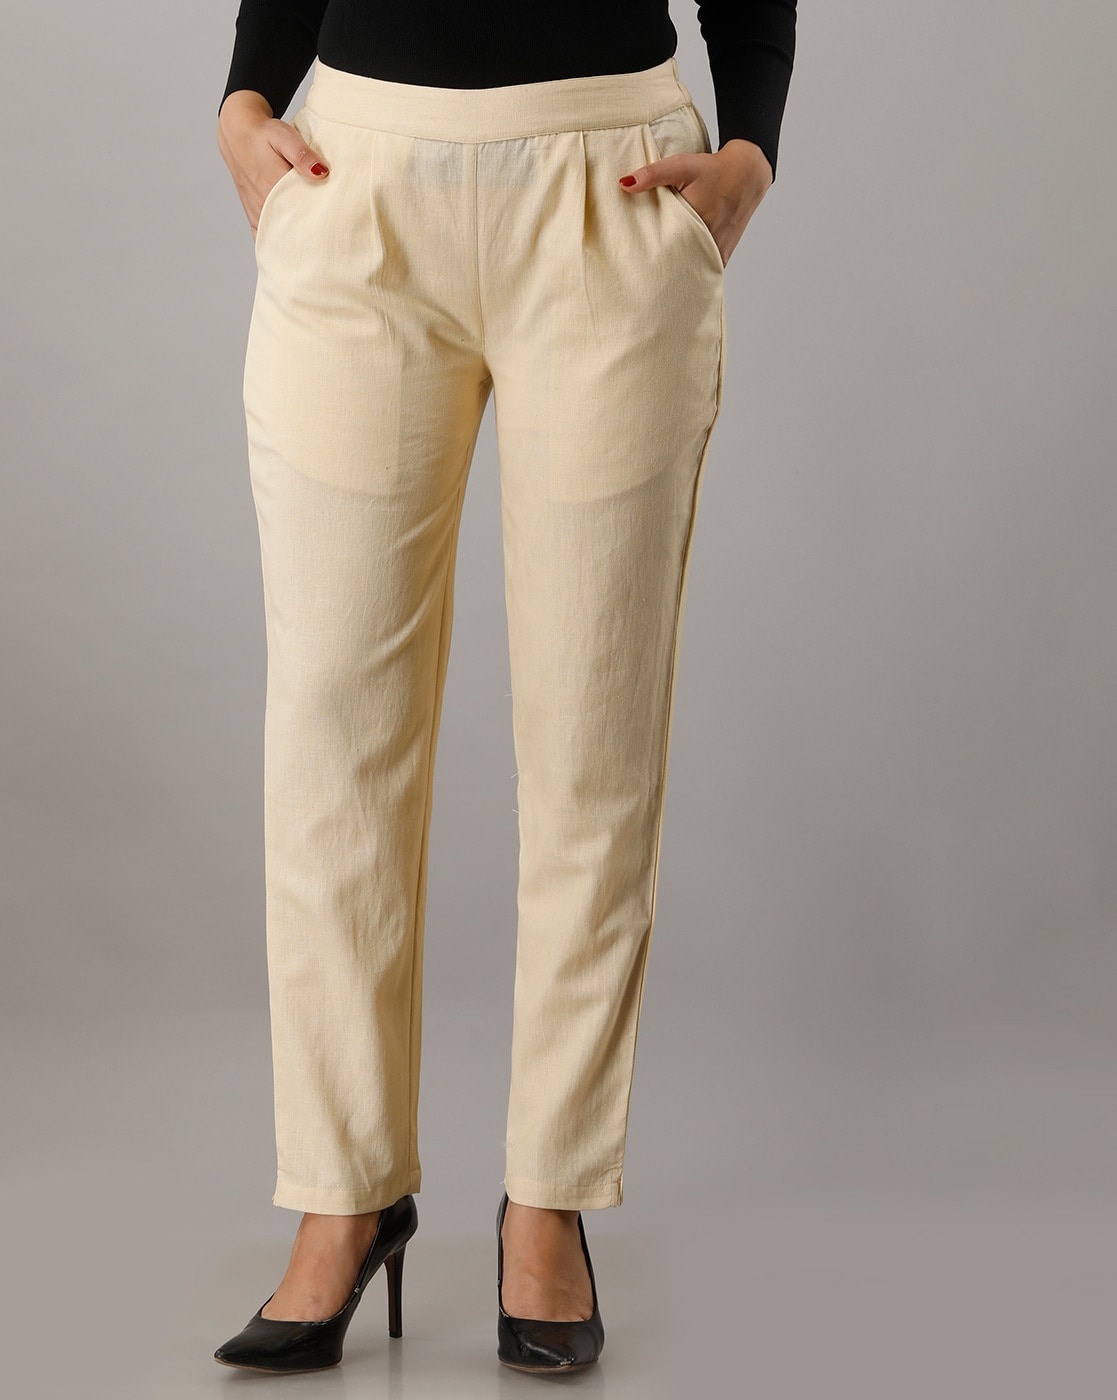 Buy COLOR WORLD Women's Pant |Gold, XS Regular Fit at Amazon.in